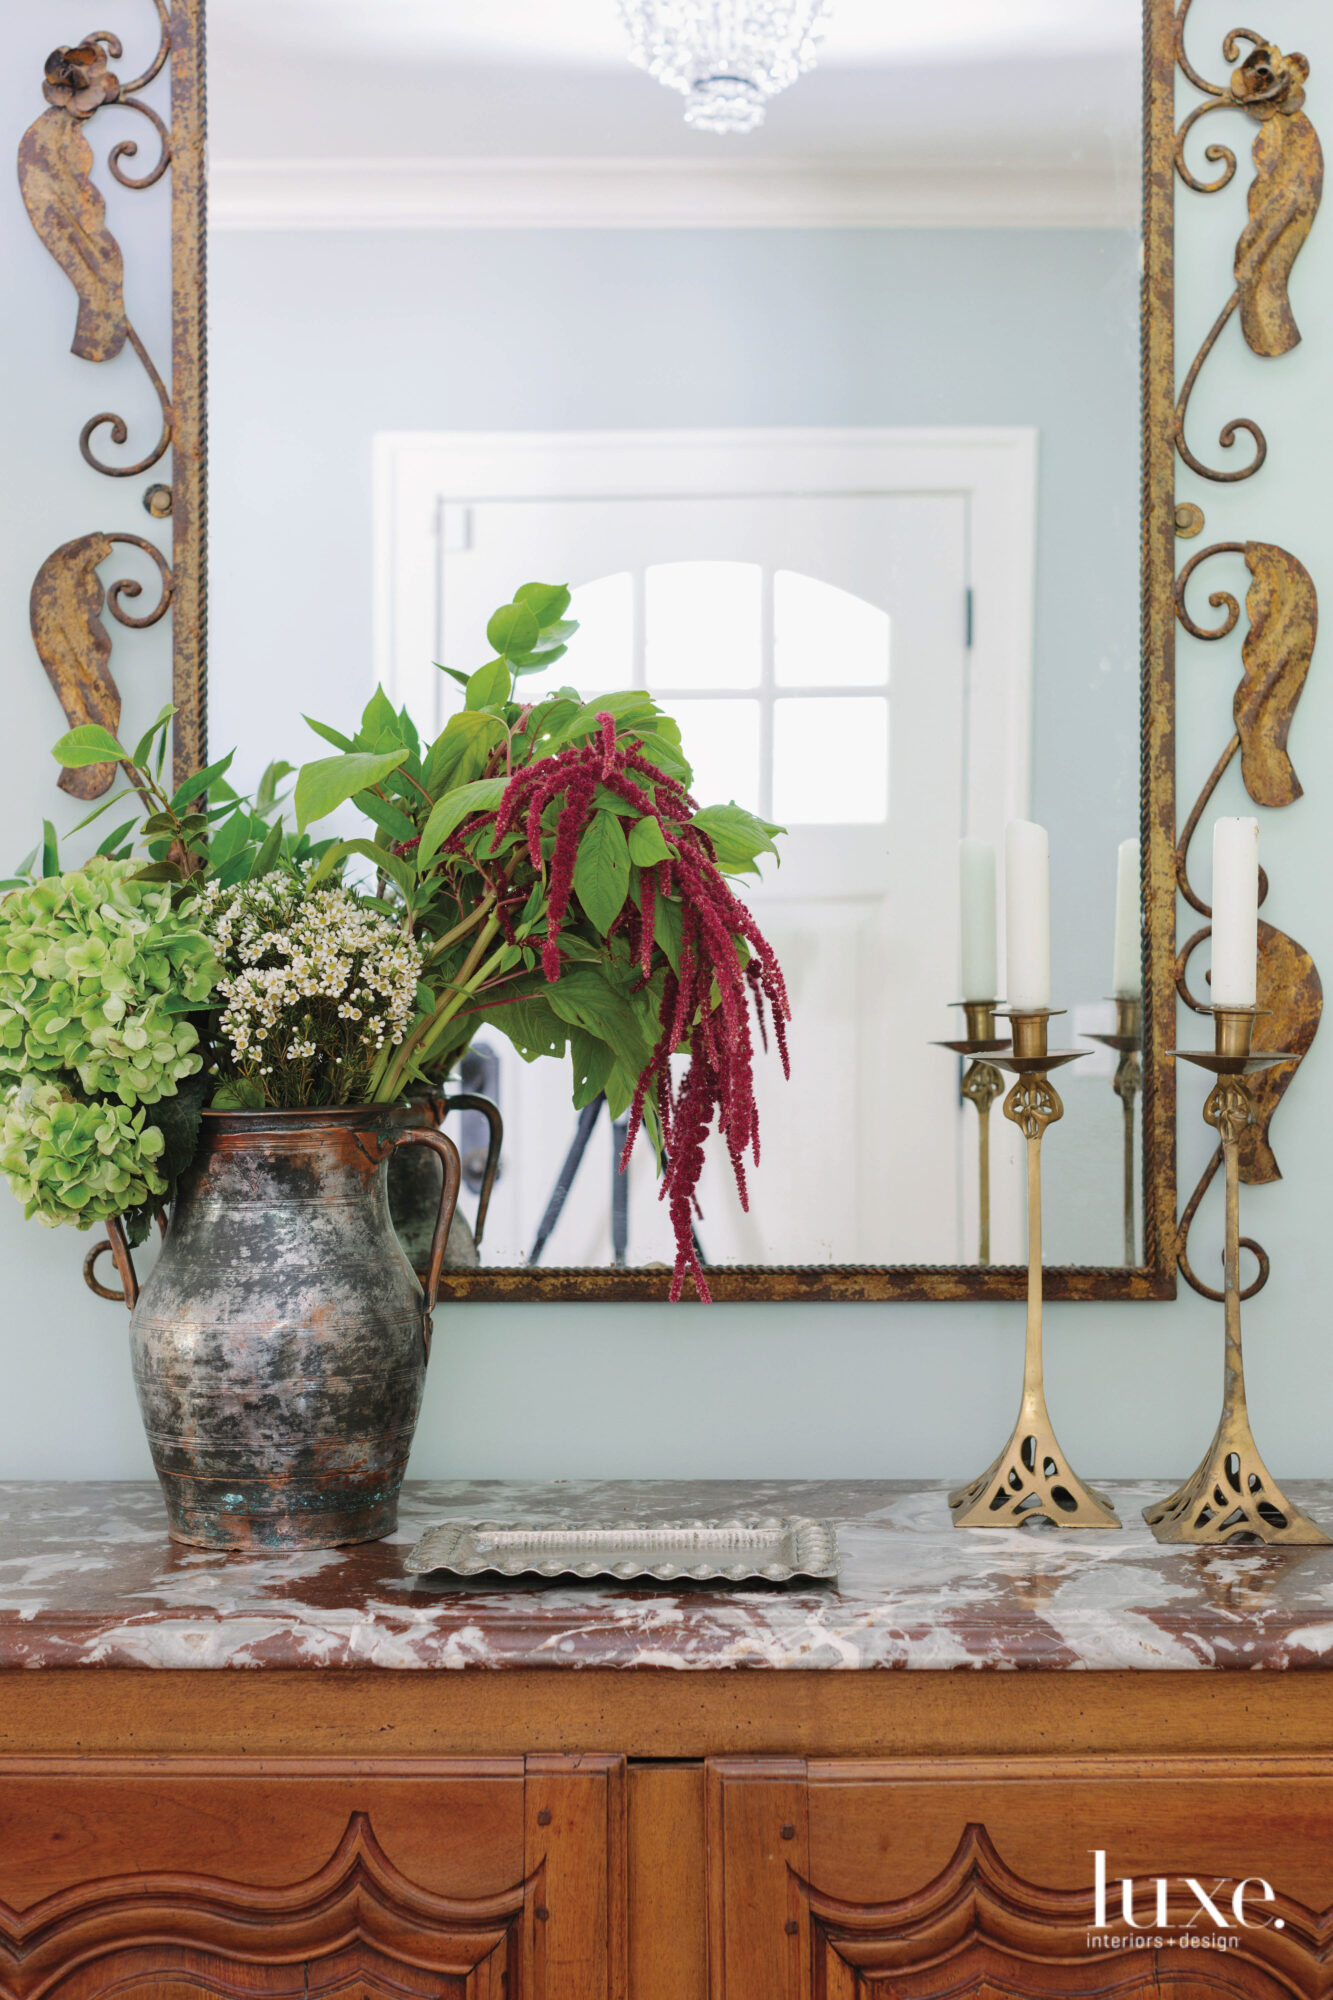 Antiques can be found all over the home, including in this vase, the mirror and candleholders